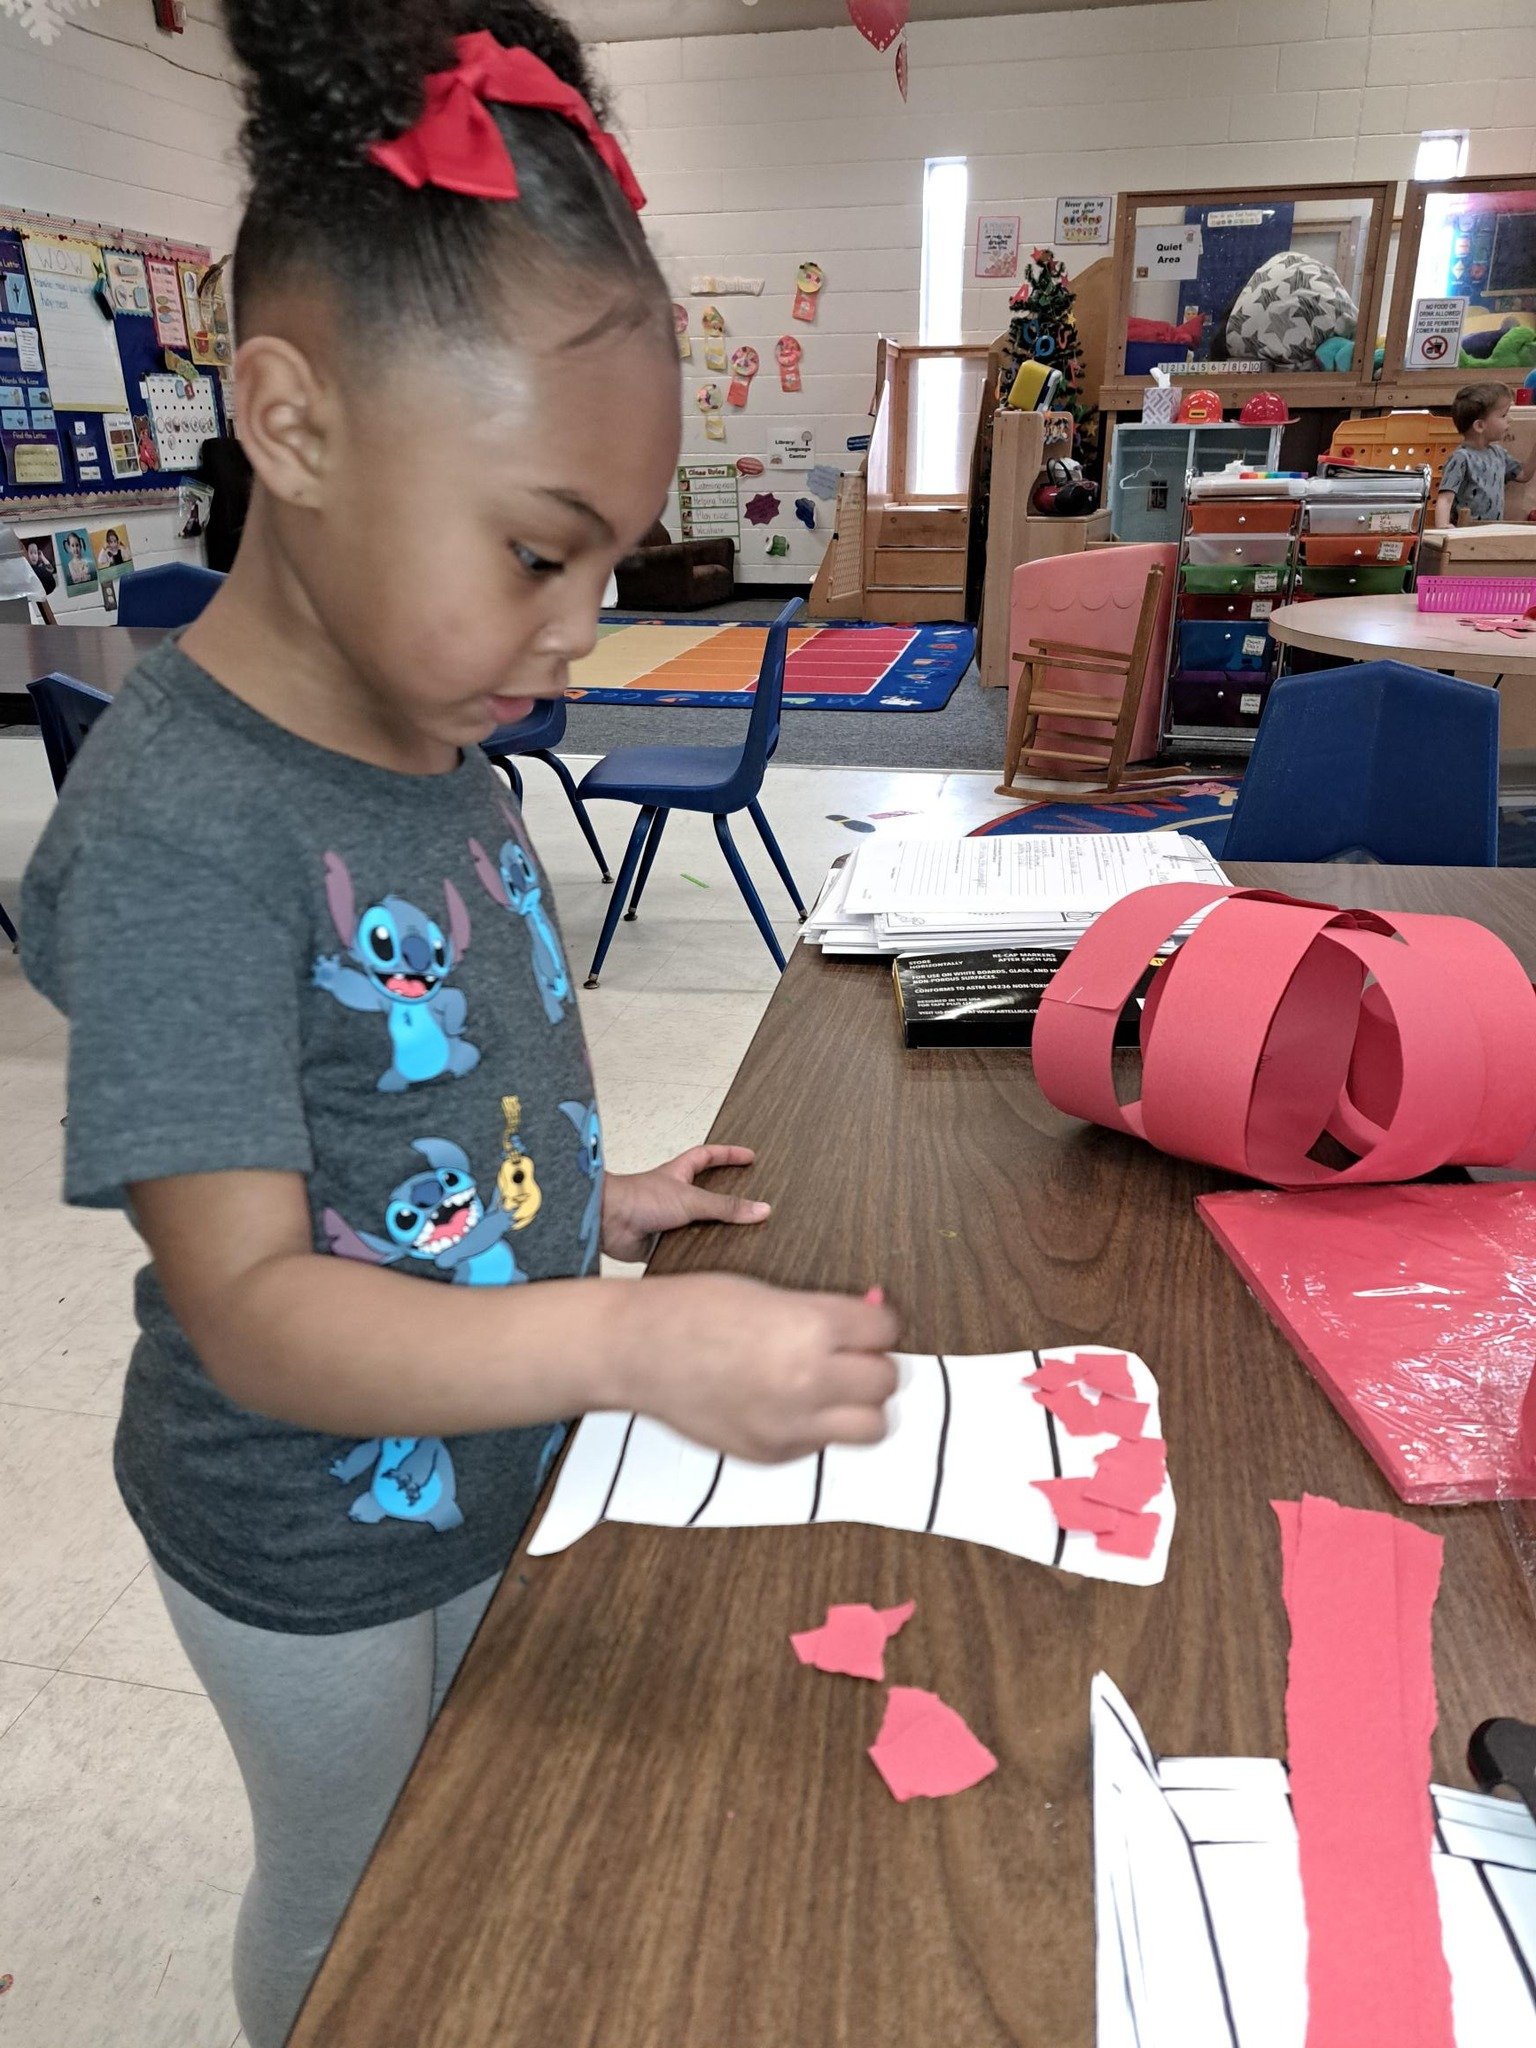  Happy Birthday Dr. Seuss! Delicious Seuss inspired cookies, wearing crazy hats and making Cat in the Hat hats made our day super special in Lincoln PreK! 